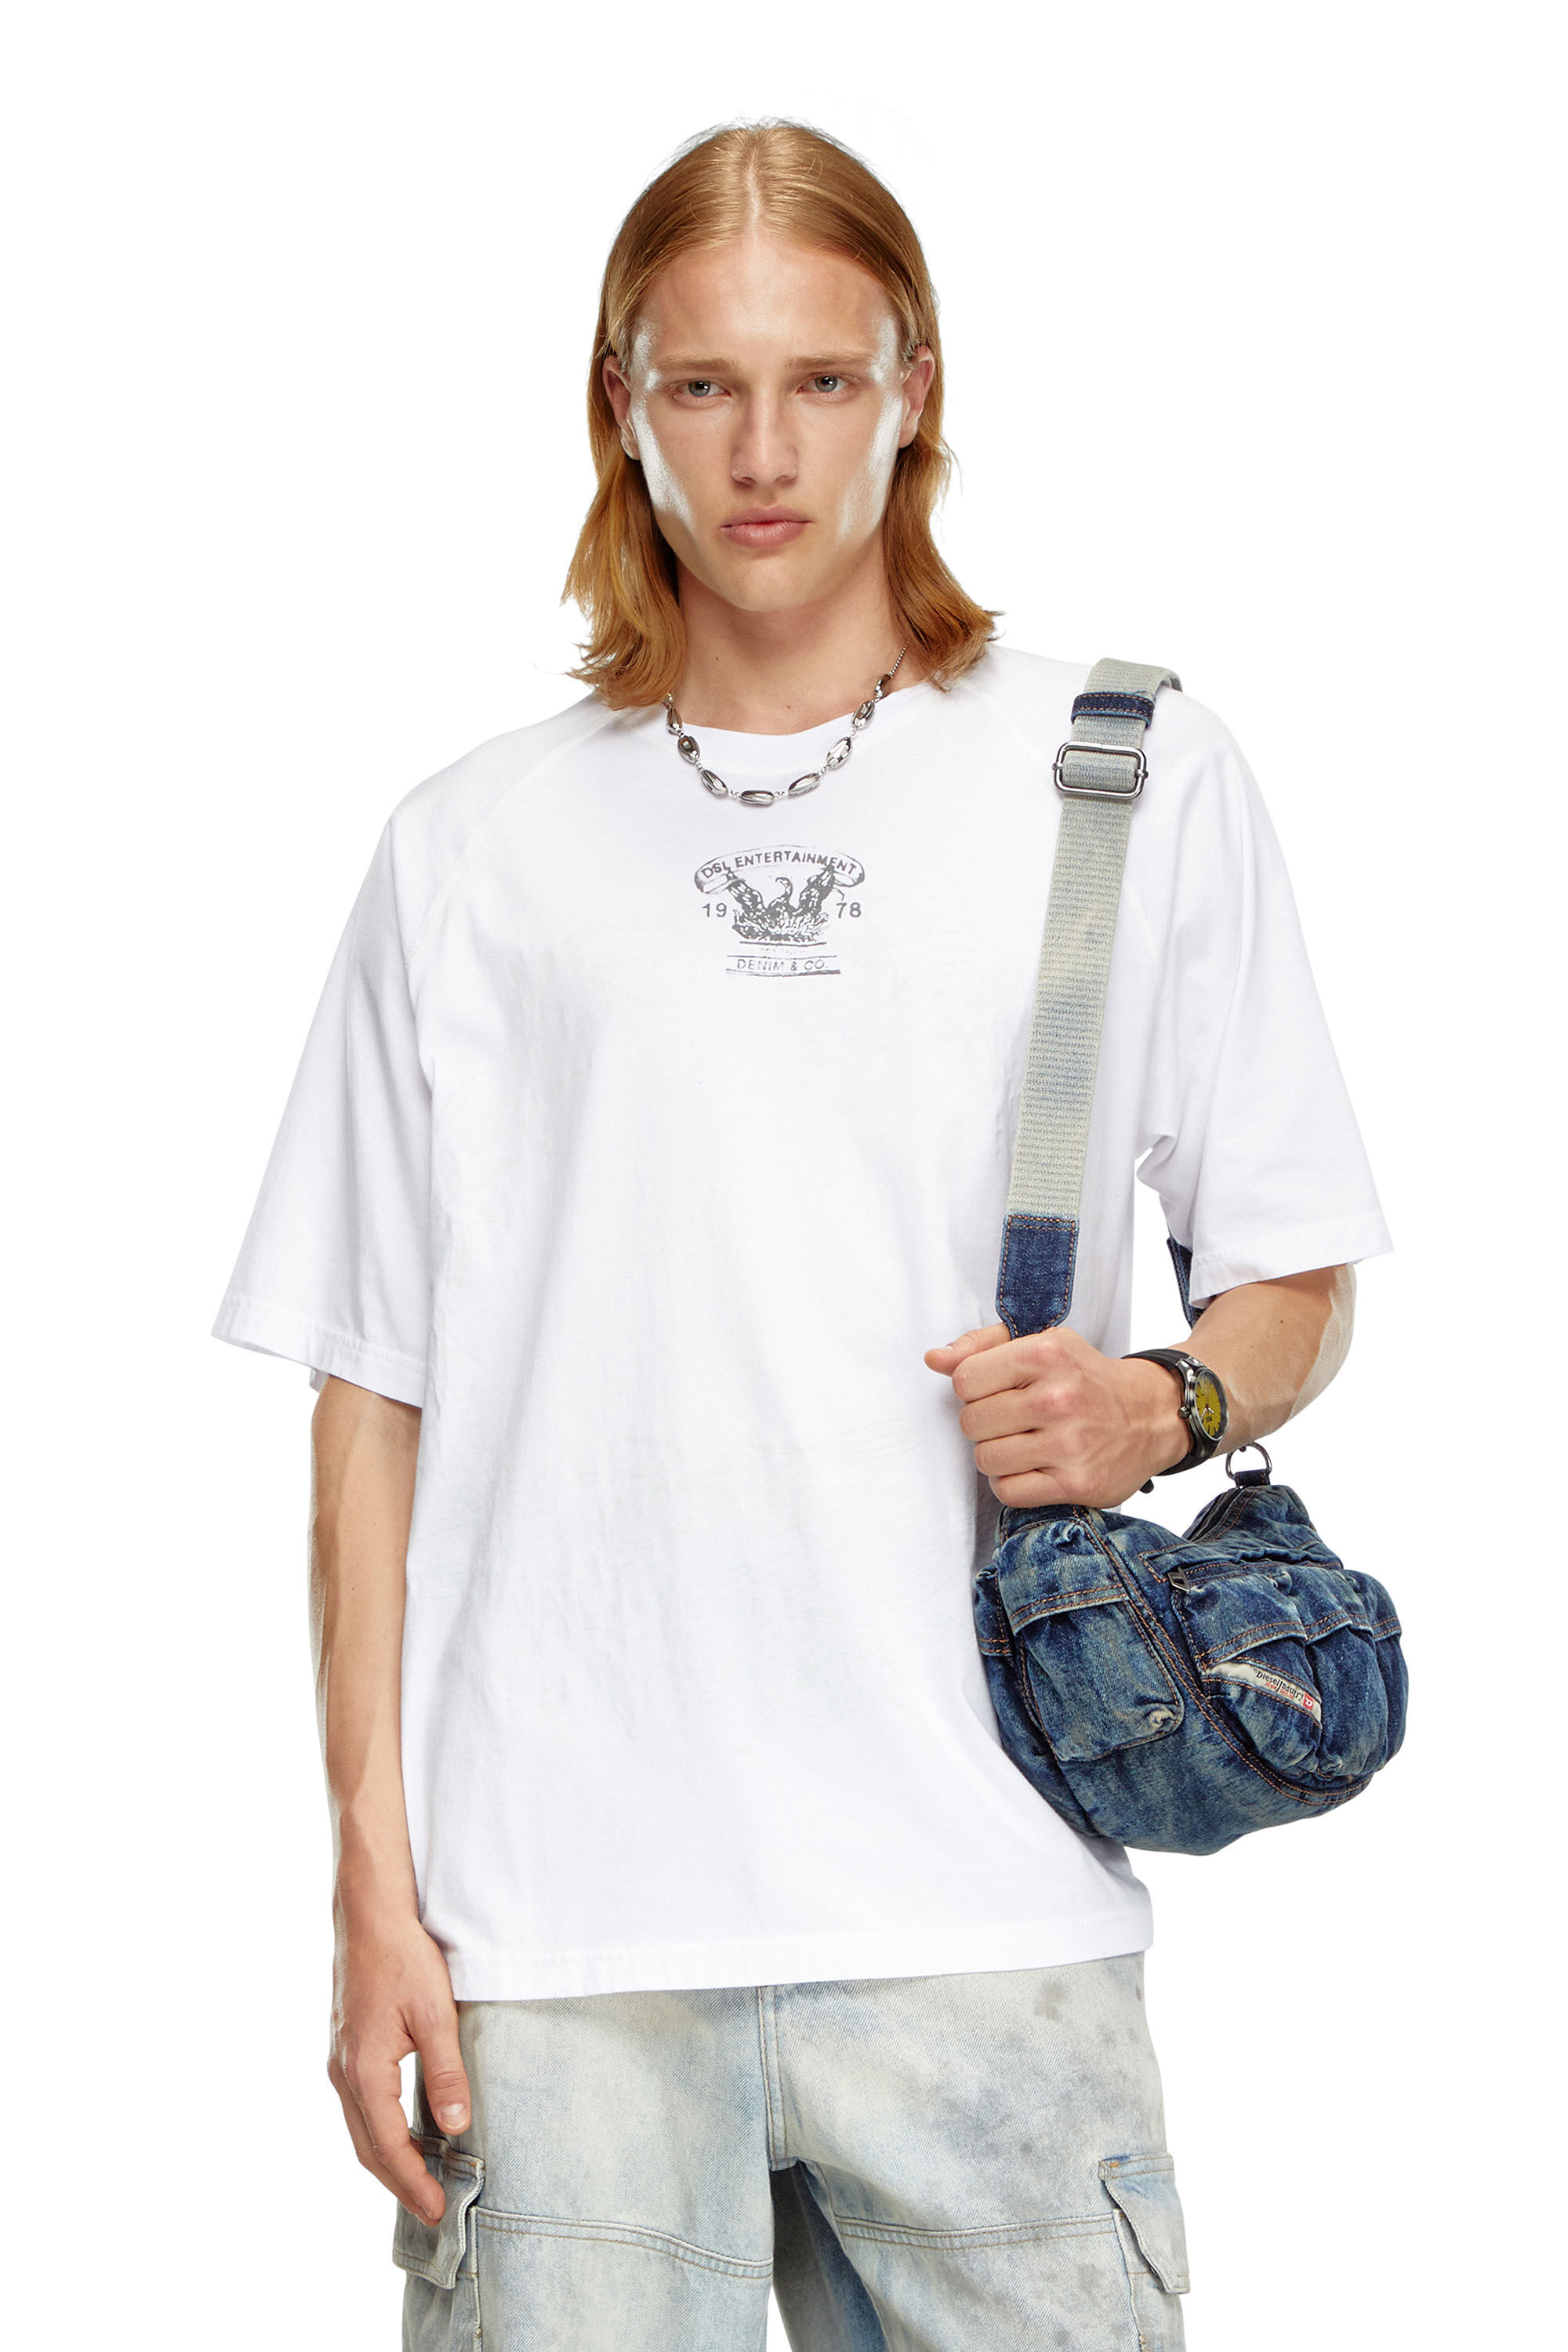 Diesel - T-ROXT-Q1, Man T-shirt with inside-out print in White - Image 3